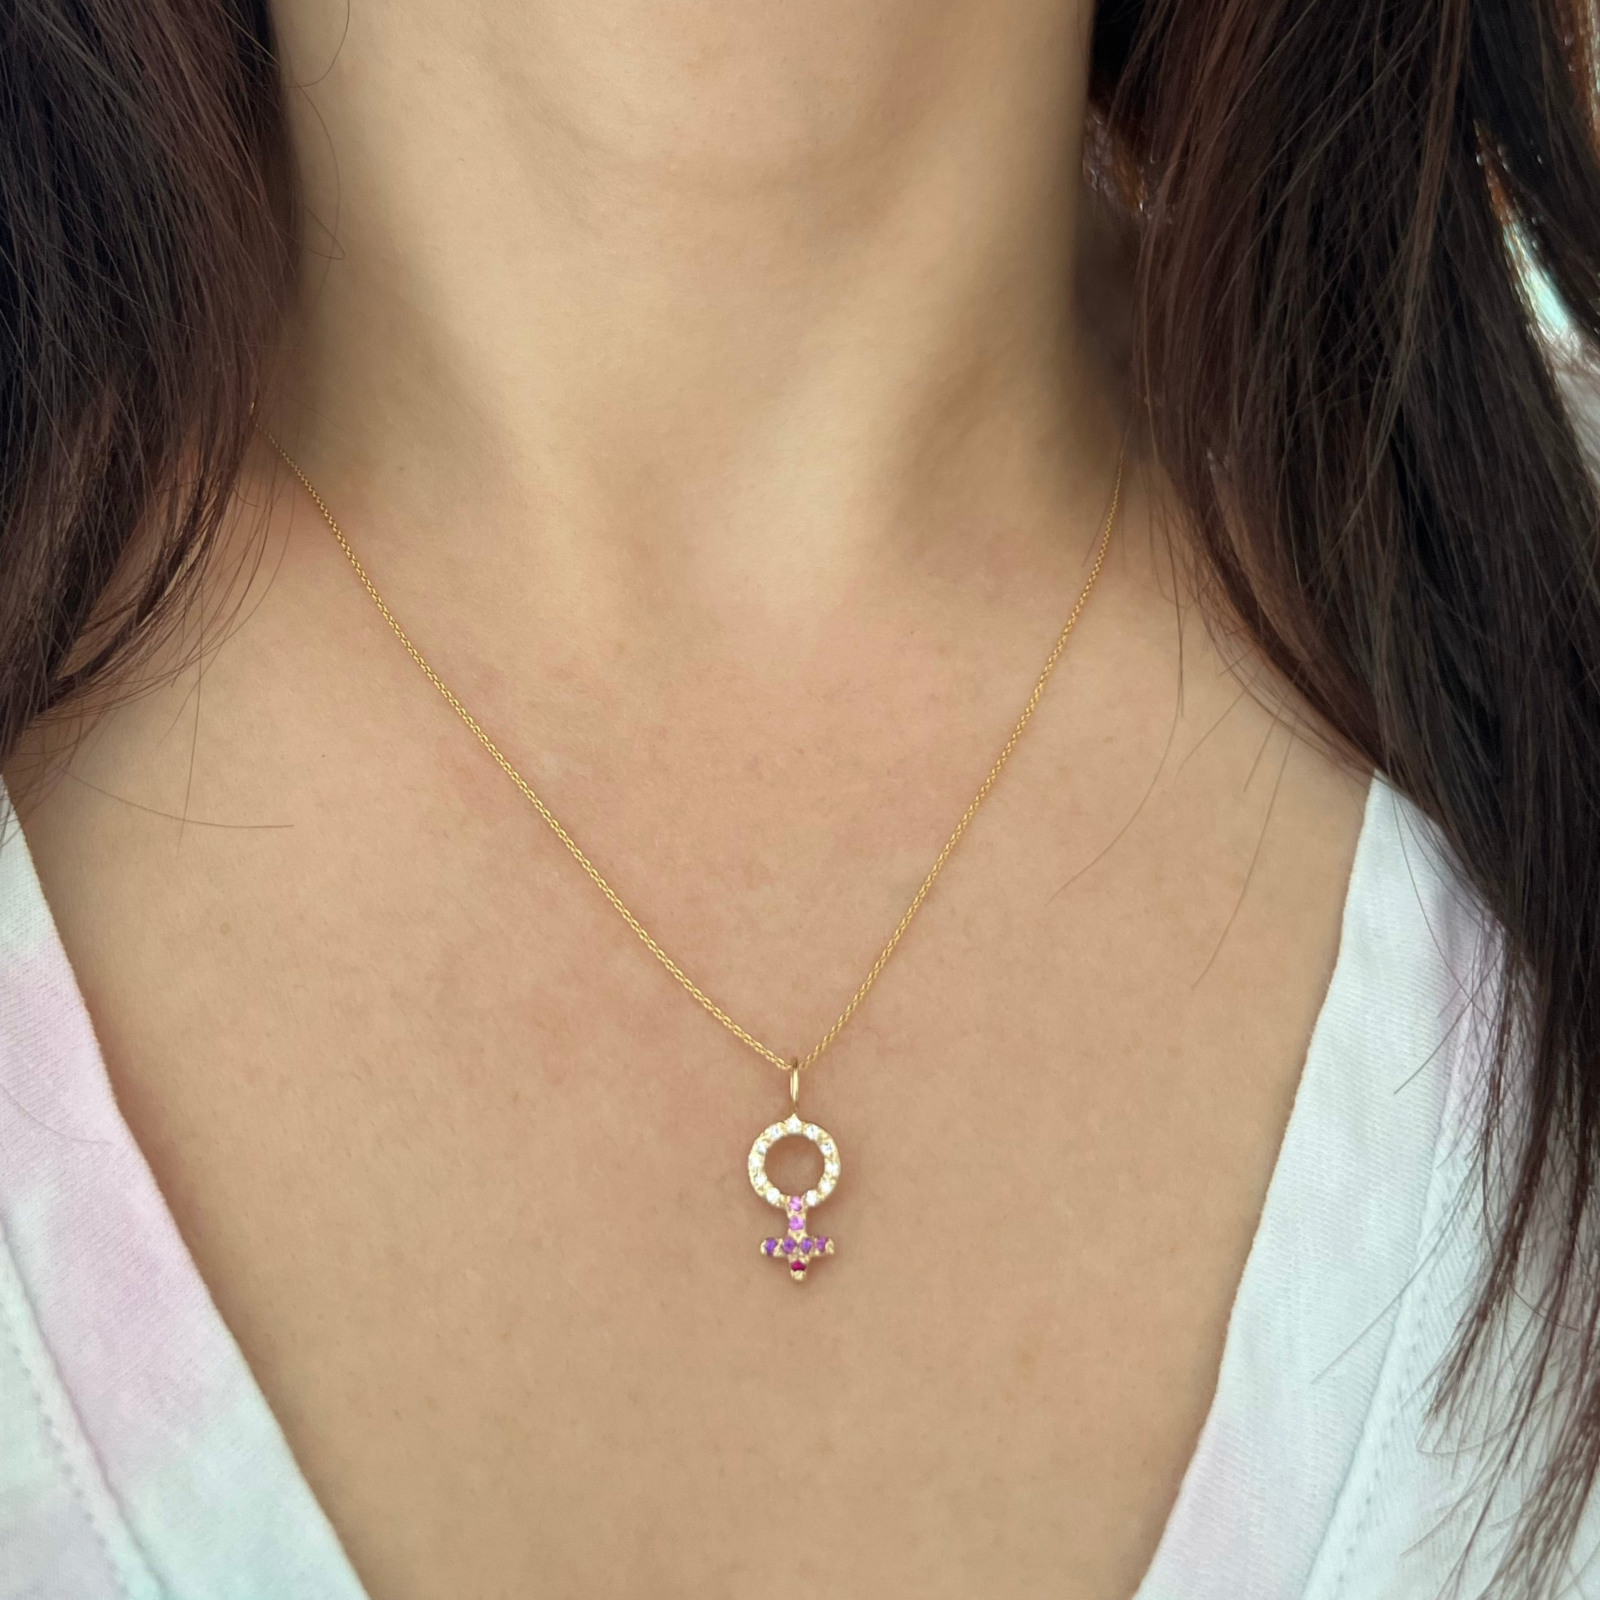 wearing the custom female charm necklace in 14k yellow gold with white dimaonds and pink gemstones